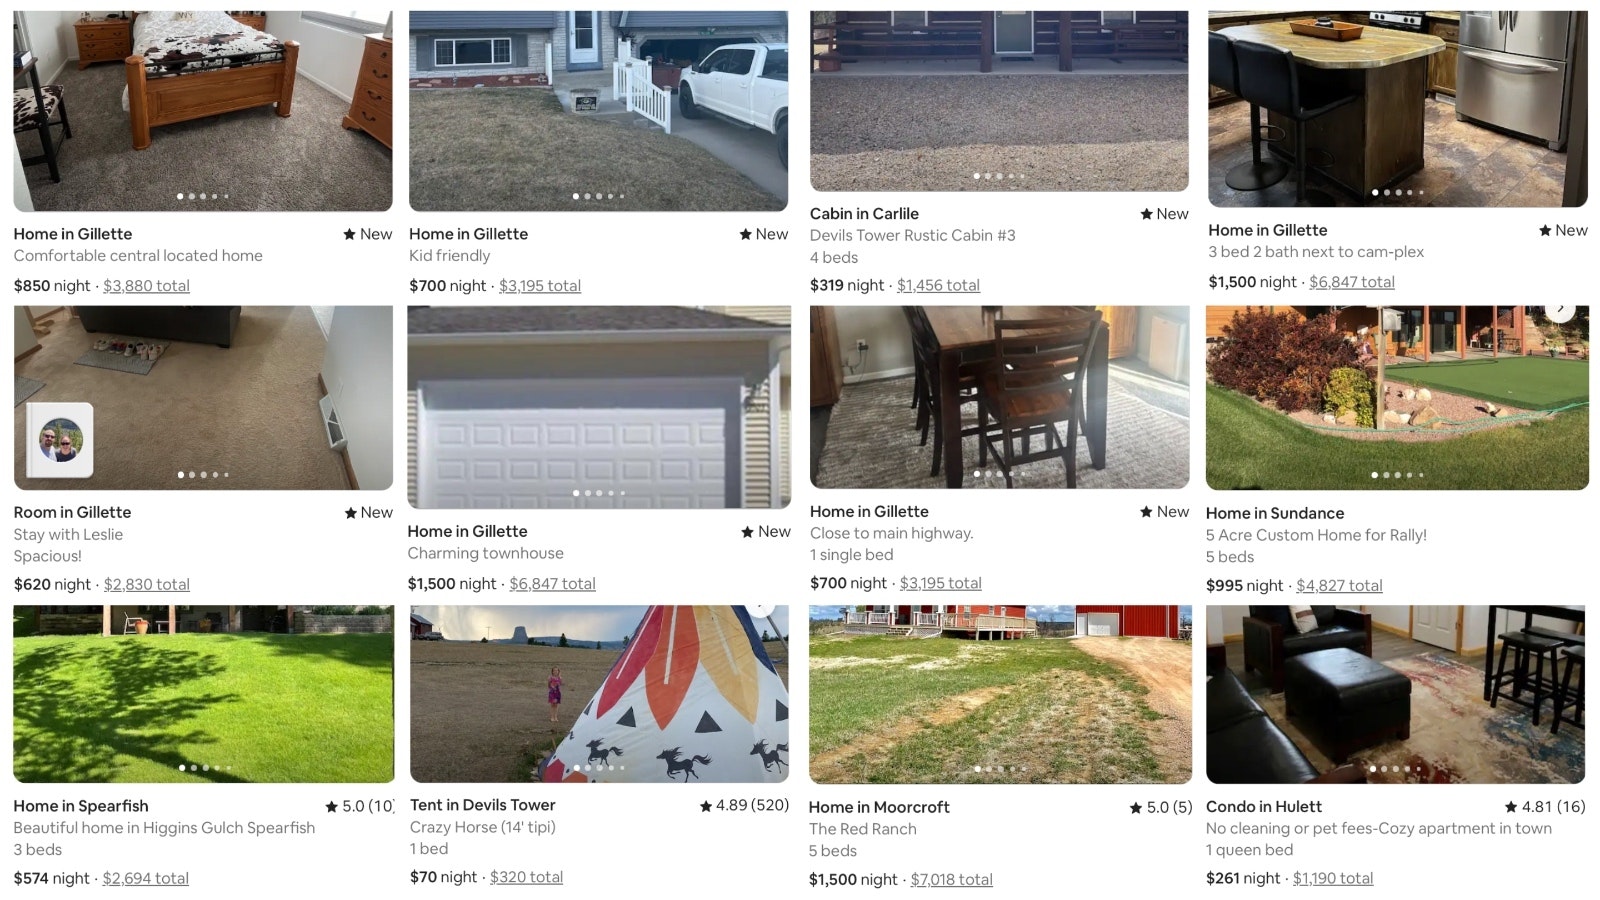 Airbnb shows rooms and homes listing from anywhere from several hundred dollars a night to has high as $1,500 during the International Pathfinders Camporee in Gillette this summer. The cheapest listing is a $70 tent near Devils Tower more than an hour away.